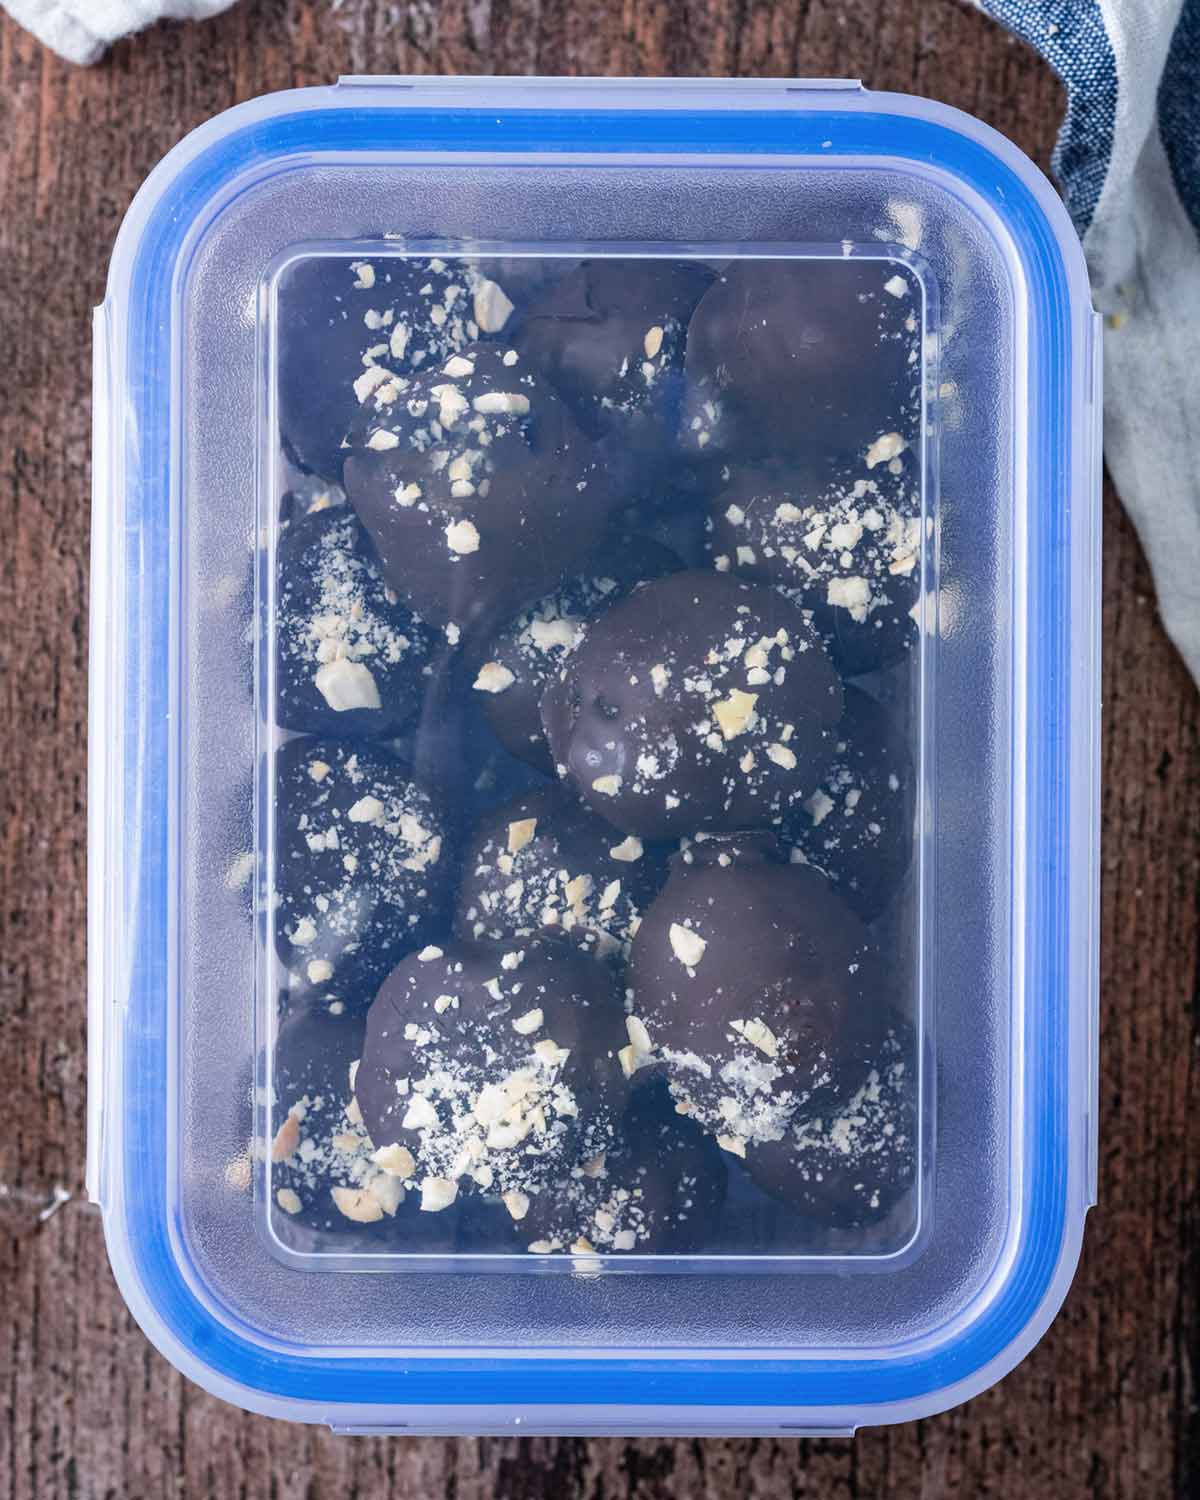 Chocolate brownie balls in an airtight plastic container.